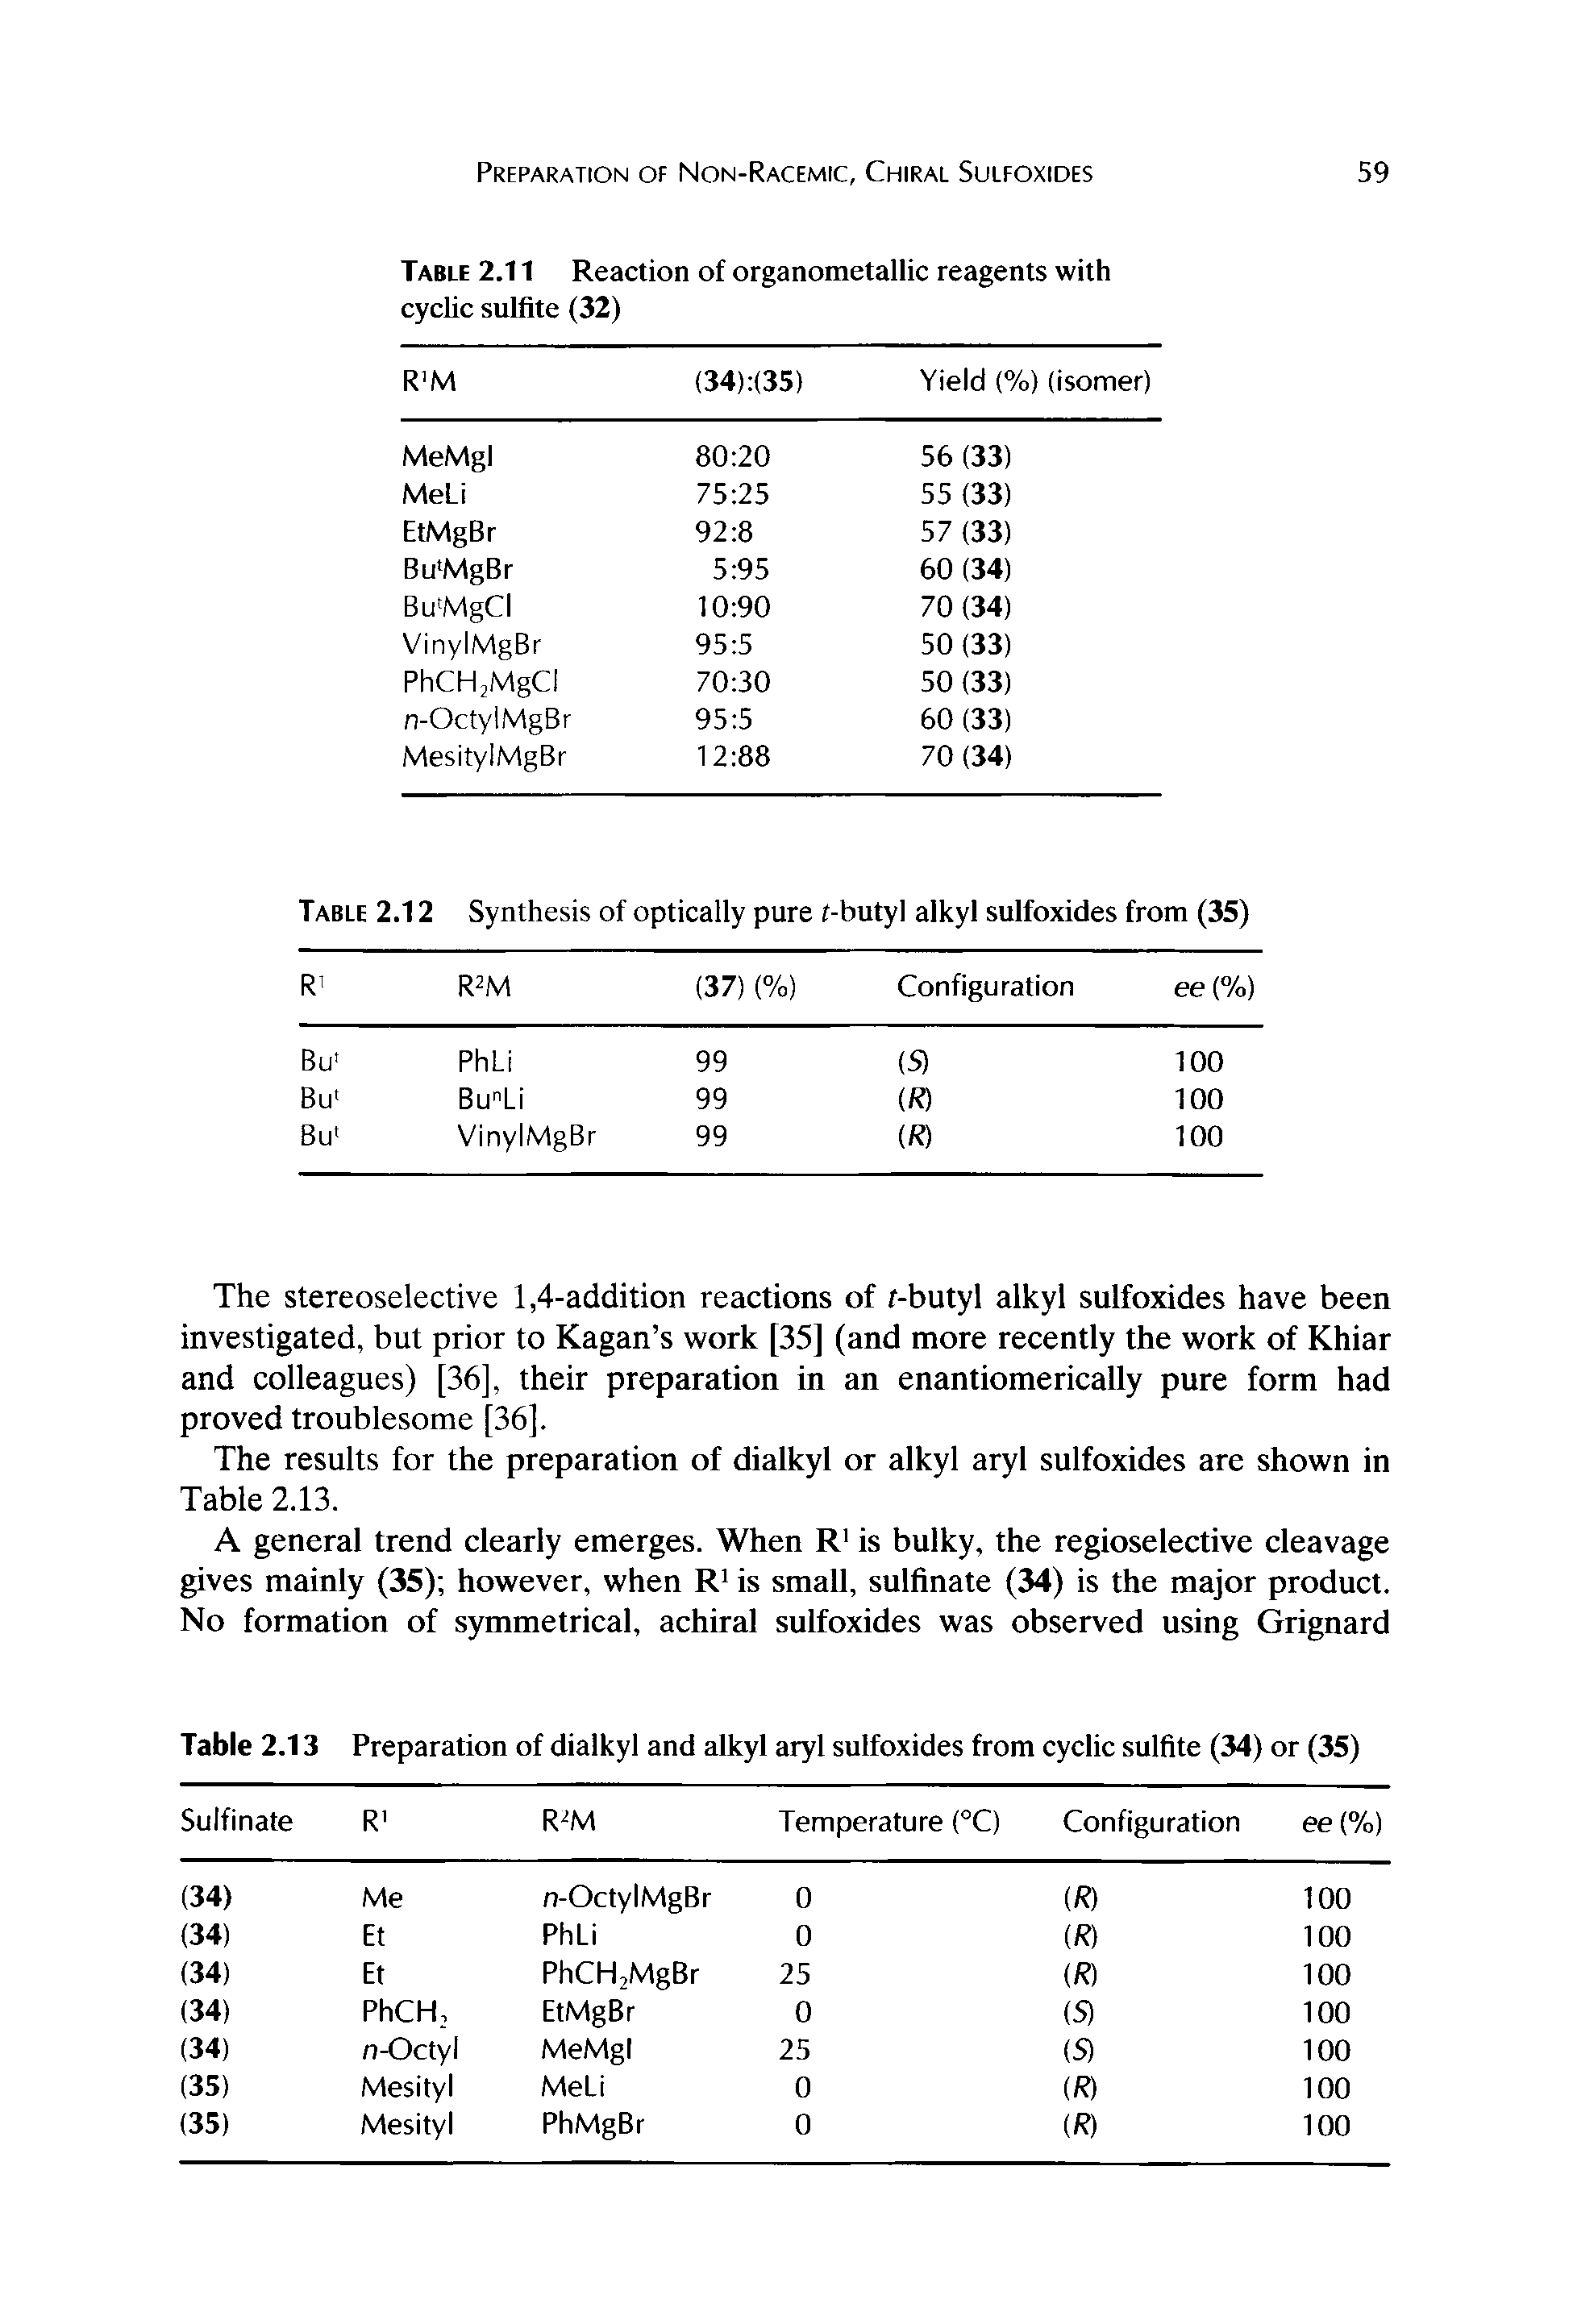 Table 2.13 Preparation of dialkyl and alkyl aryl sulfoxides from cyclic sulfite (34) or (35)...